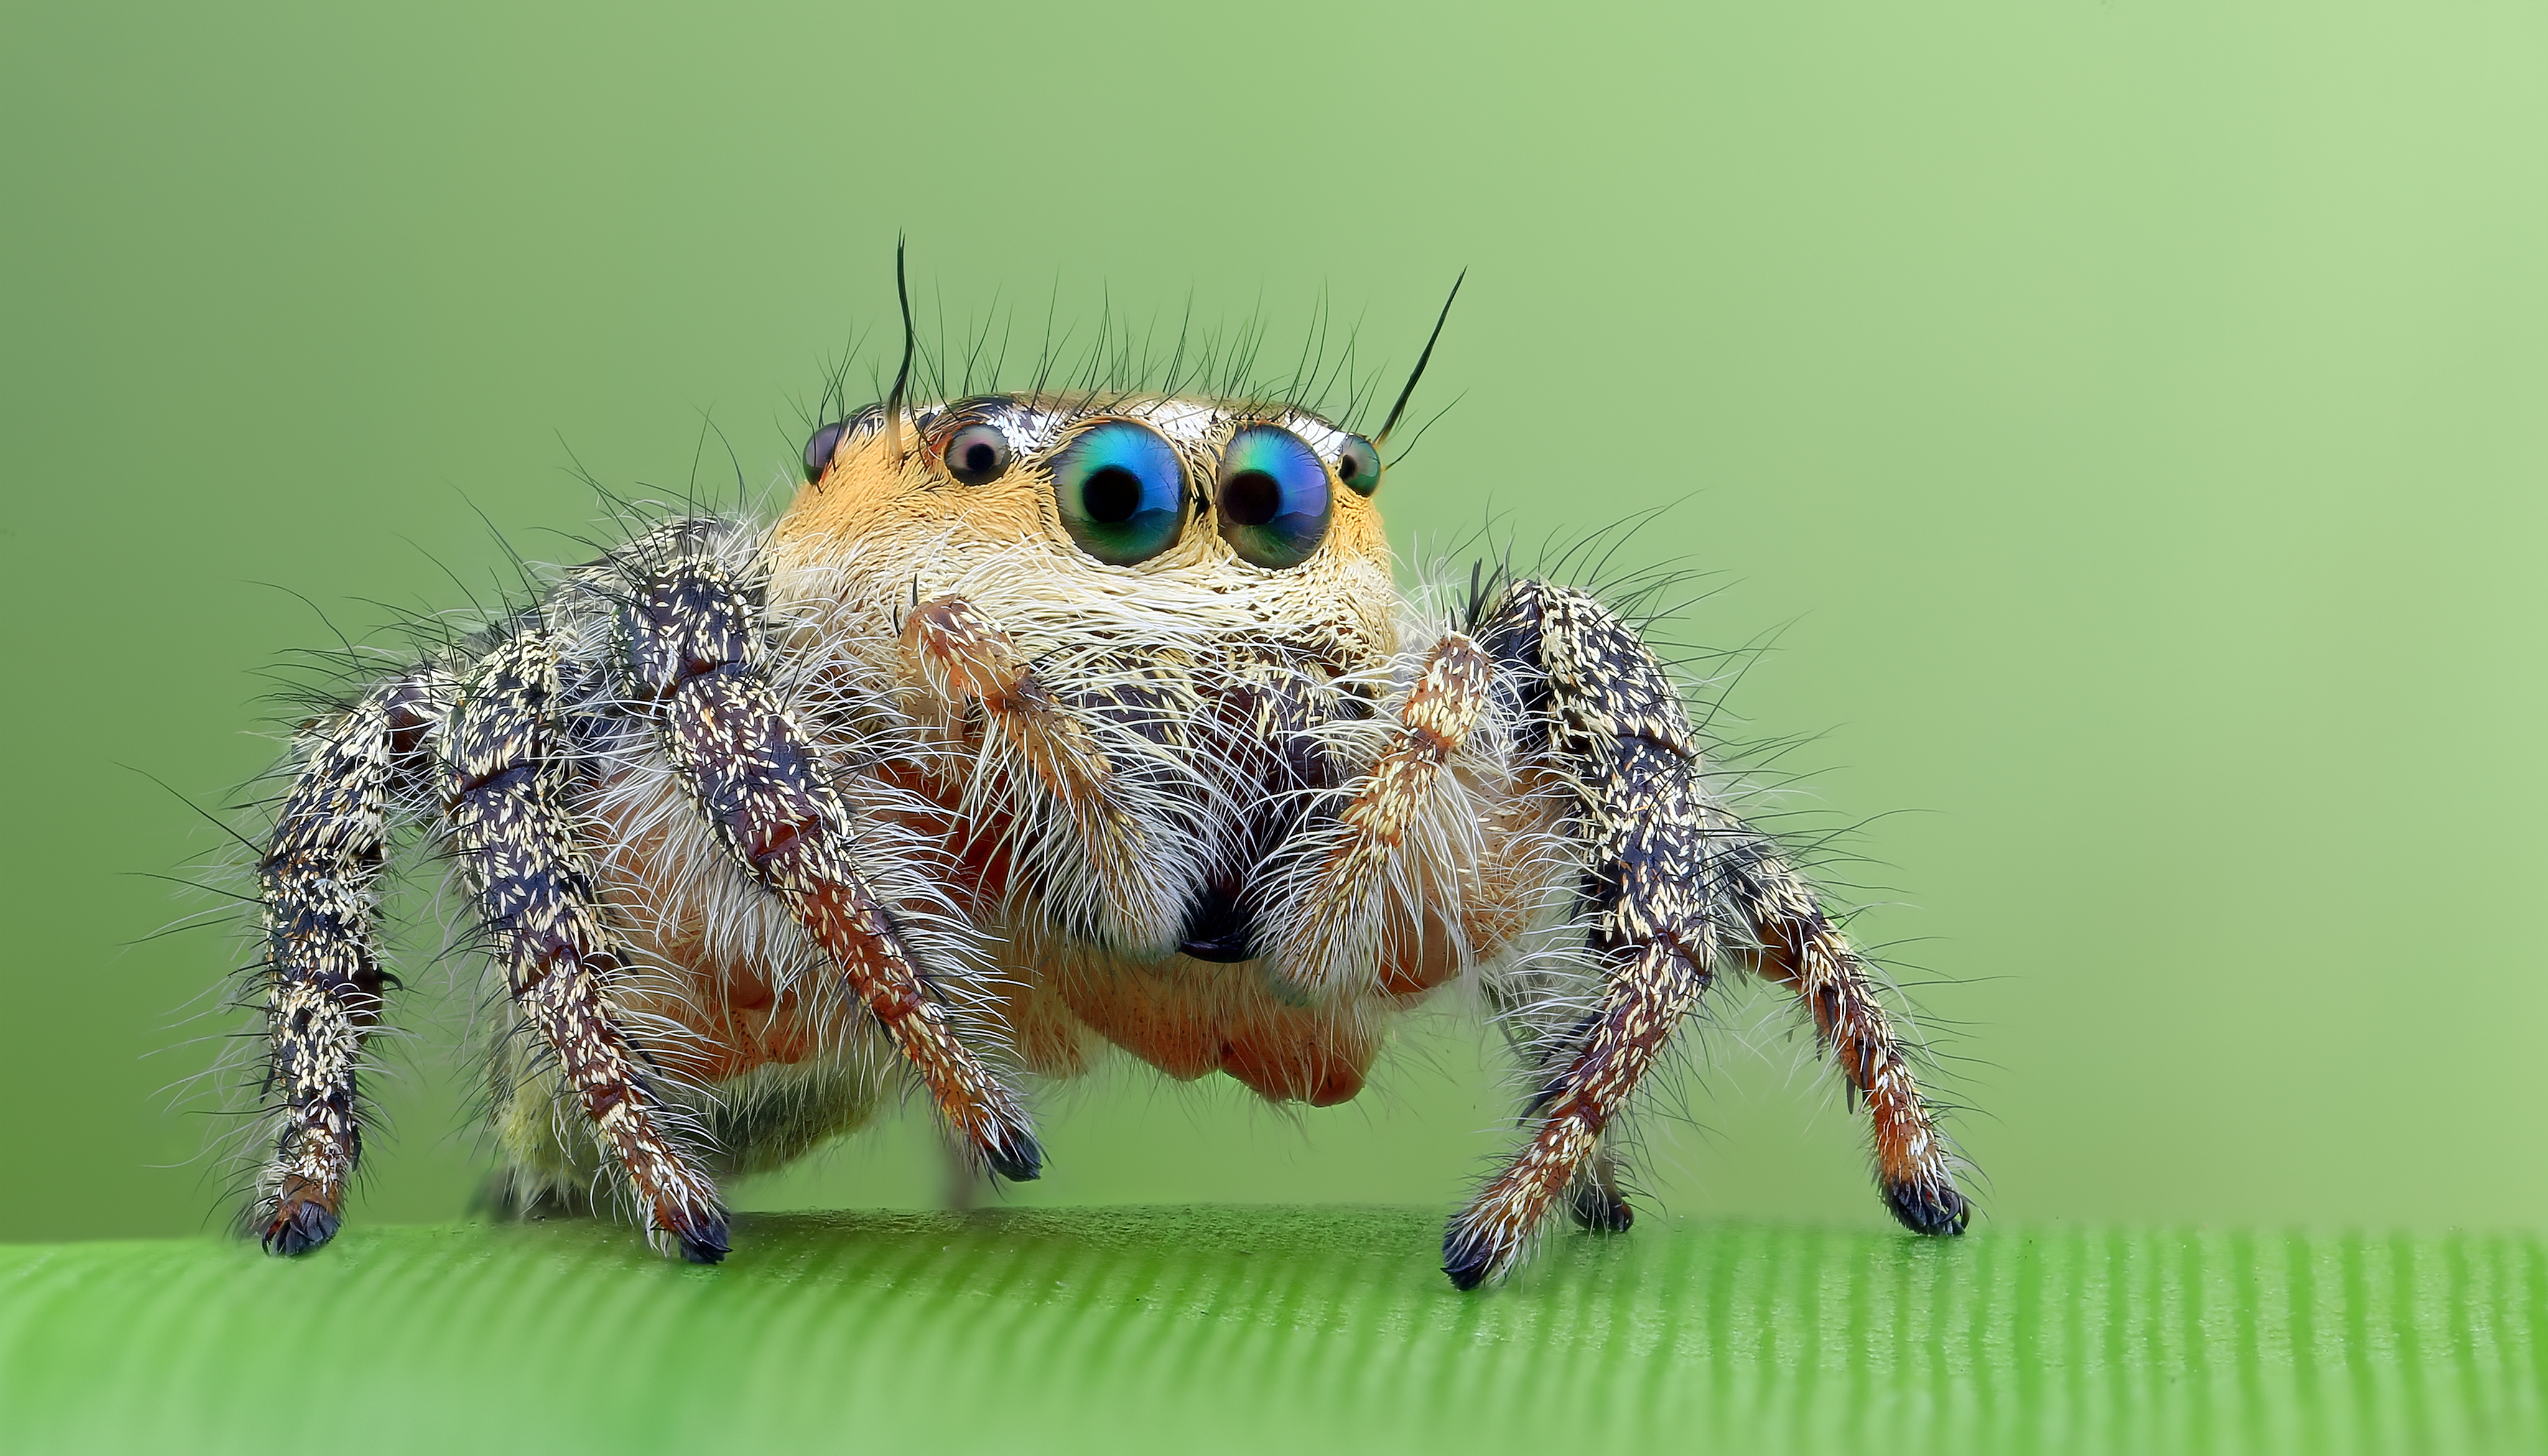 Jumping Spider - The Spider Shop